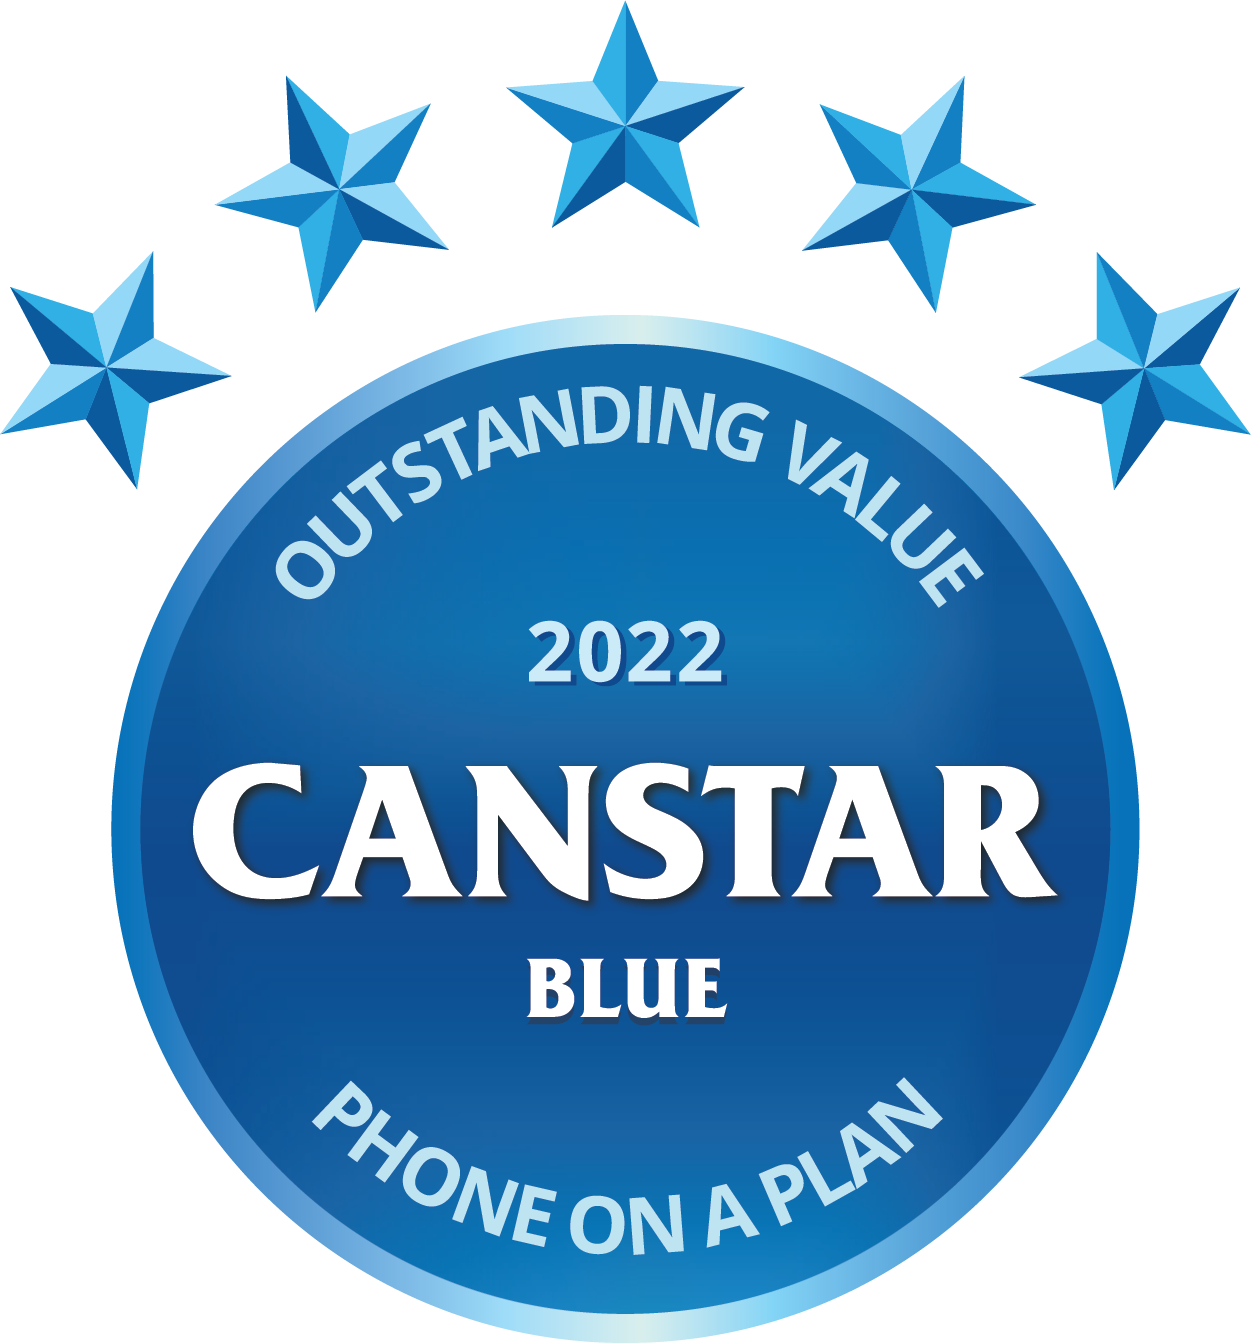 Outstanding Value Award Phone on a plan logo